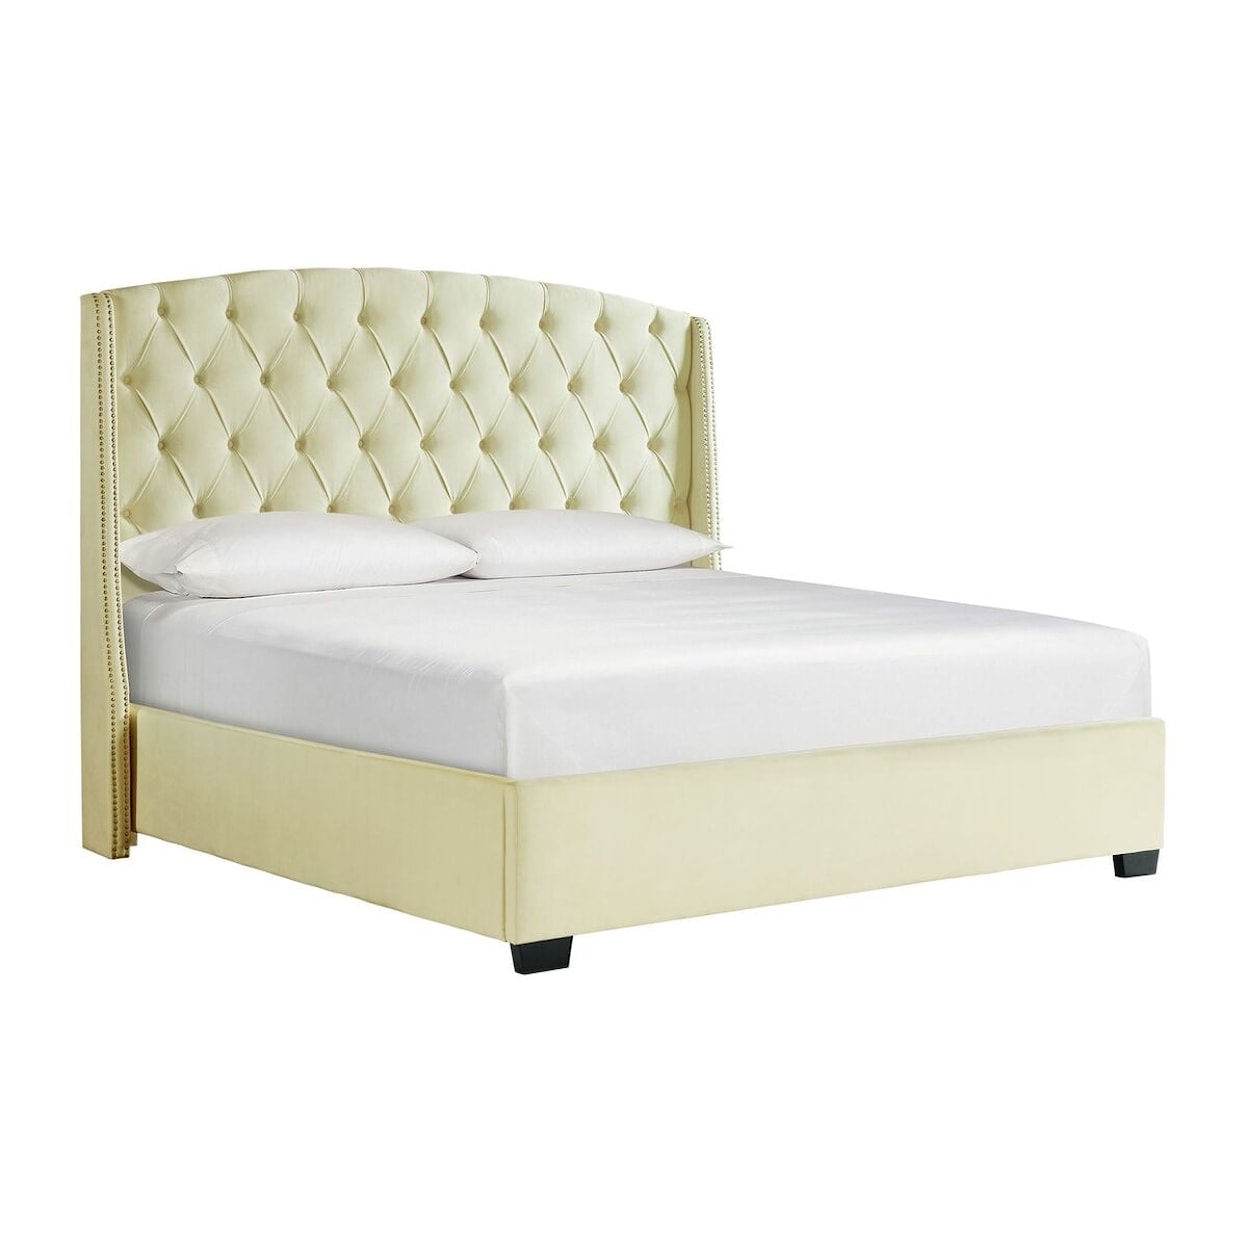 Elements International Foster Upholstered Queen Platform Bed with Tufting